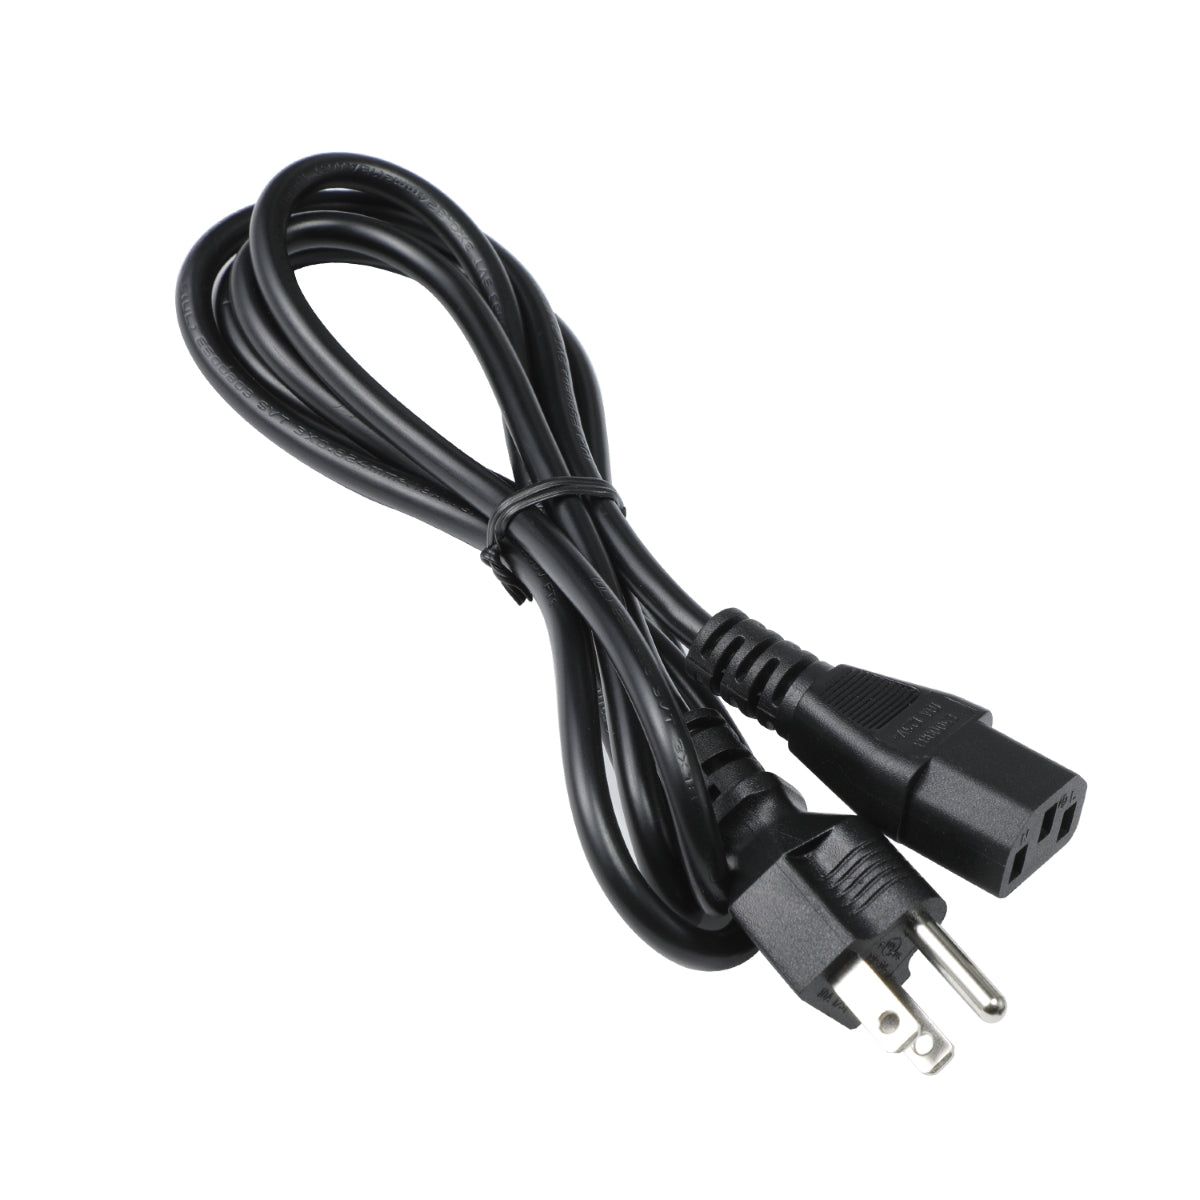 Power Cord for ViewSonic VG2765 Display